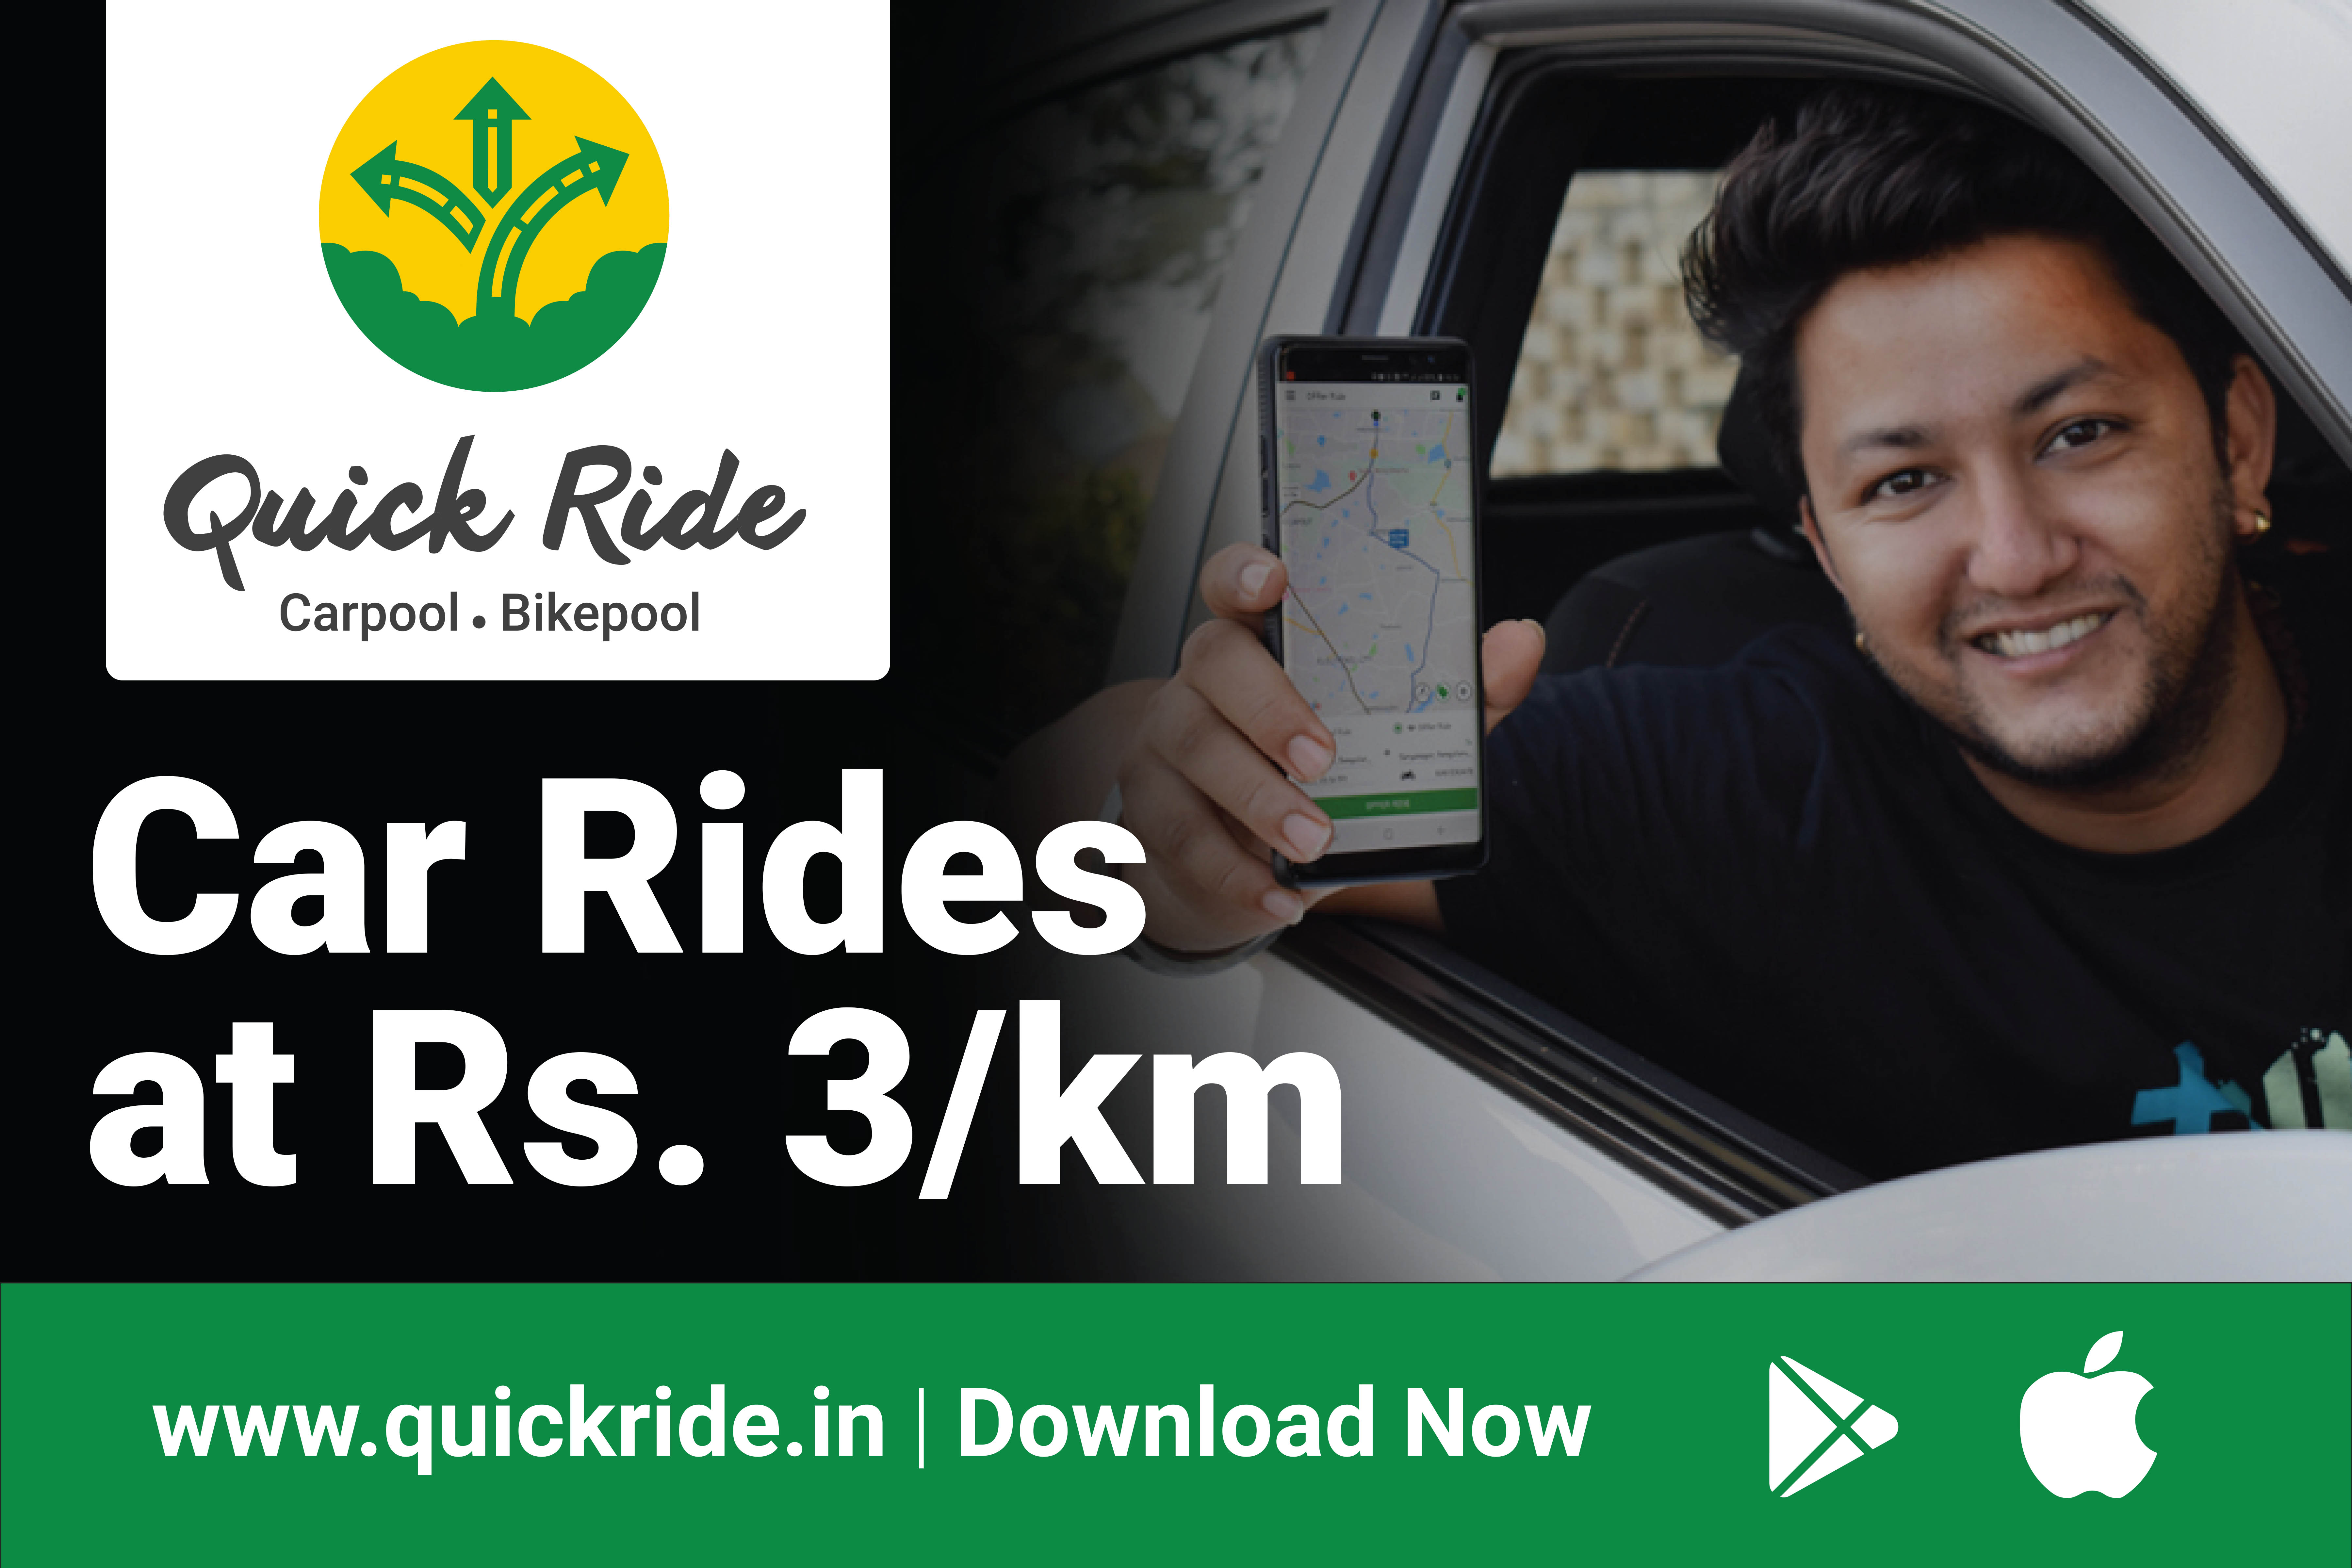 Quick Ride is on a mission to make your everyday travel as smooth as possible